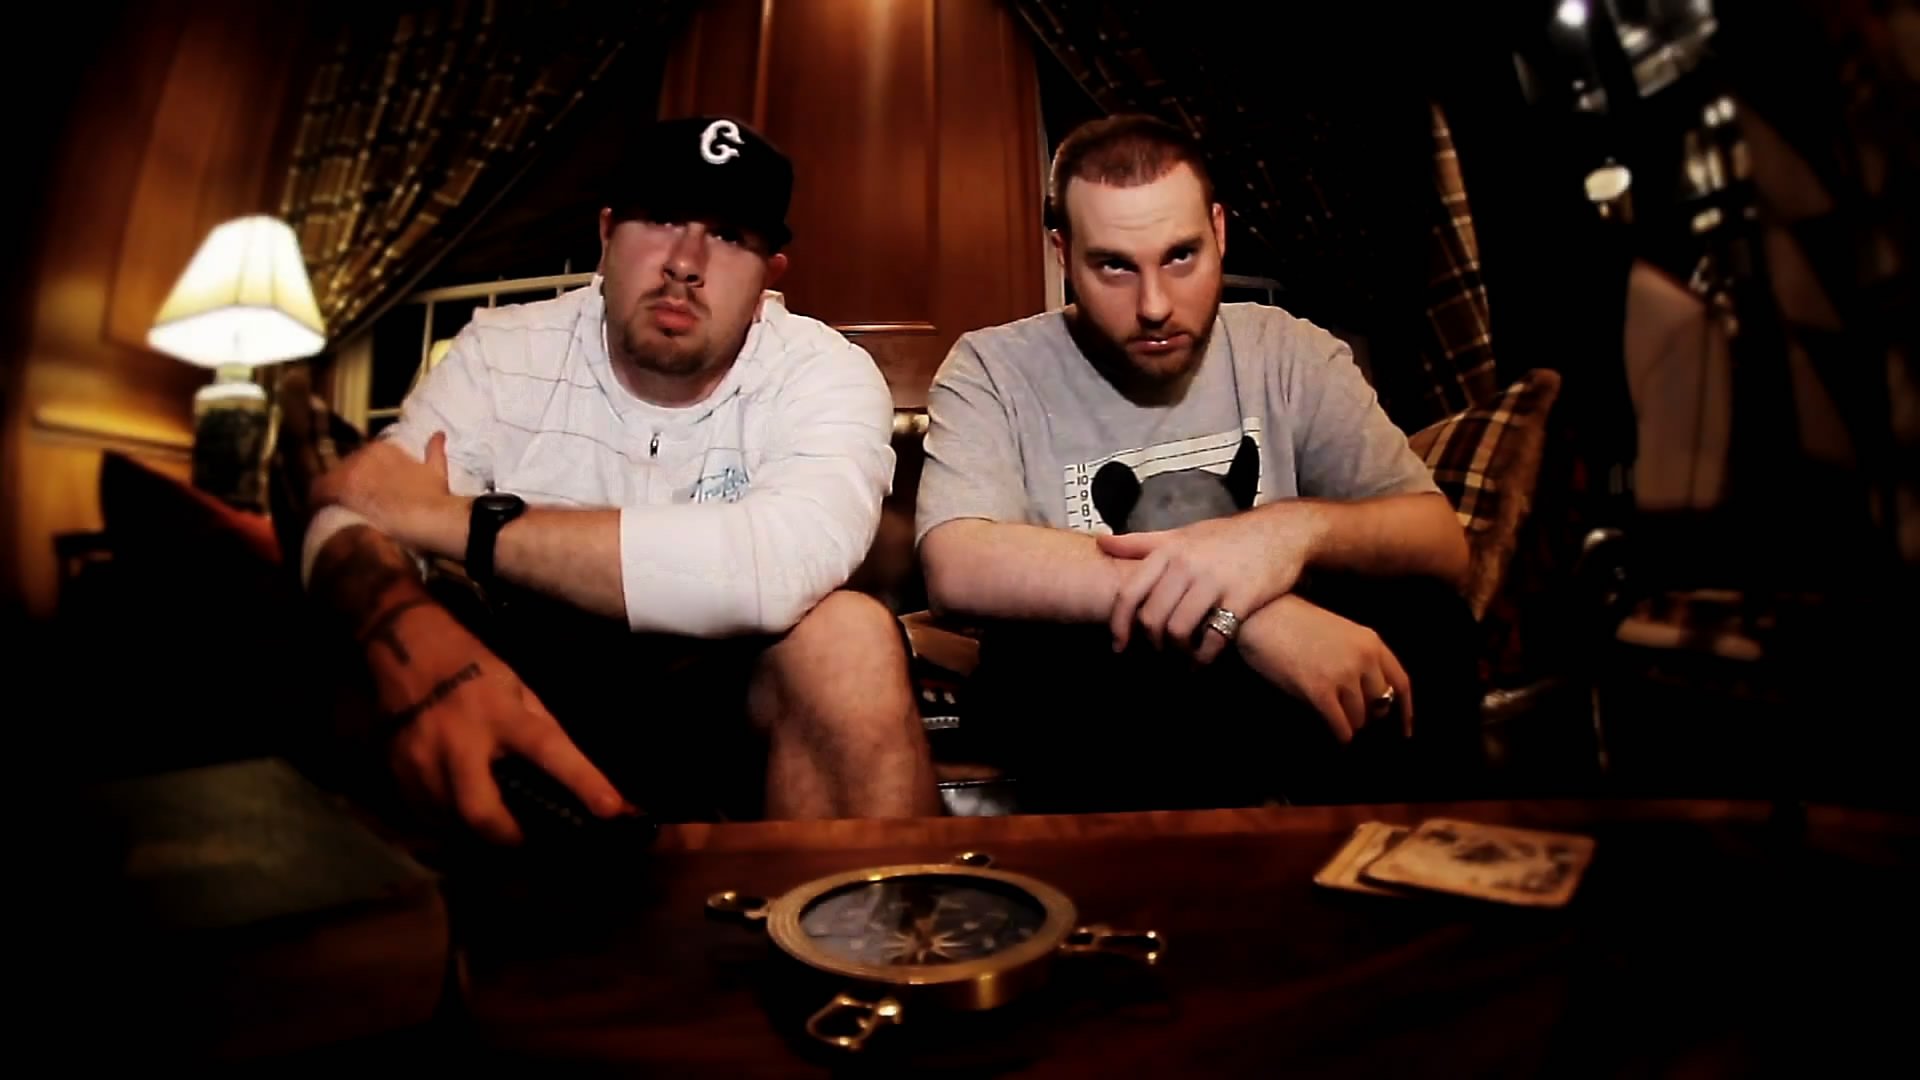 Apathy & Celph Titled age, hometown, biography | Last.fm